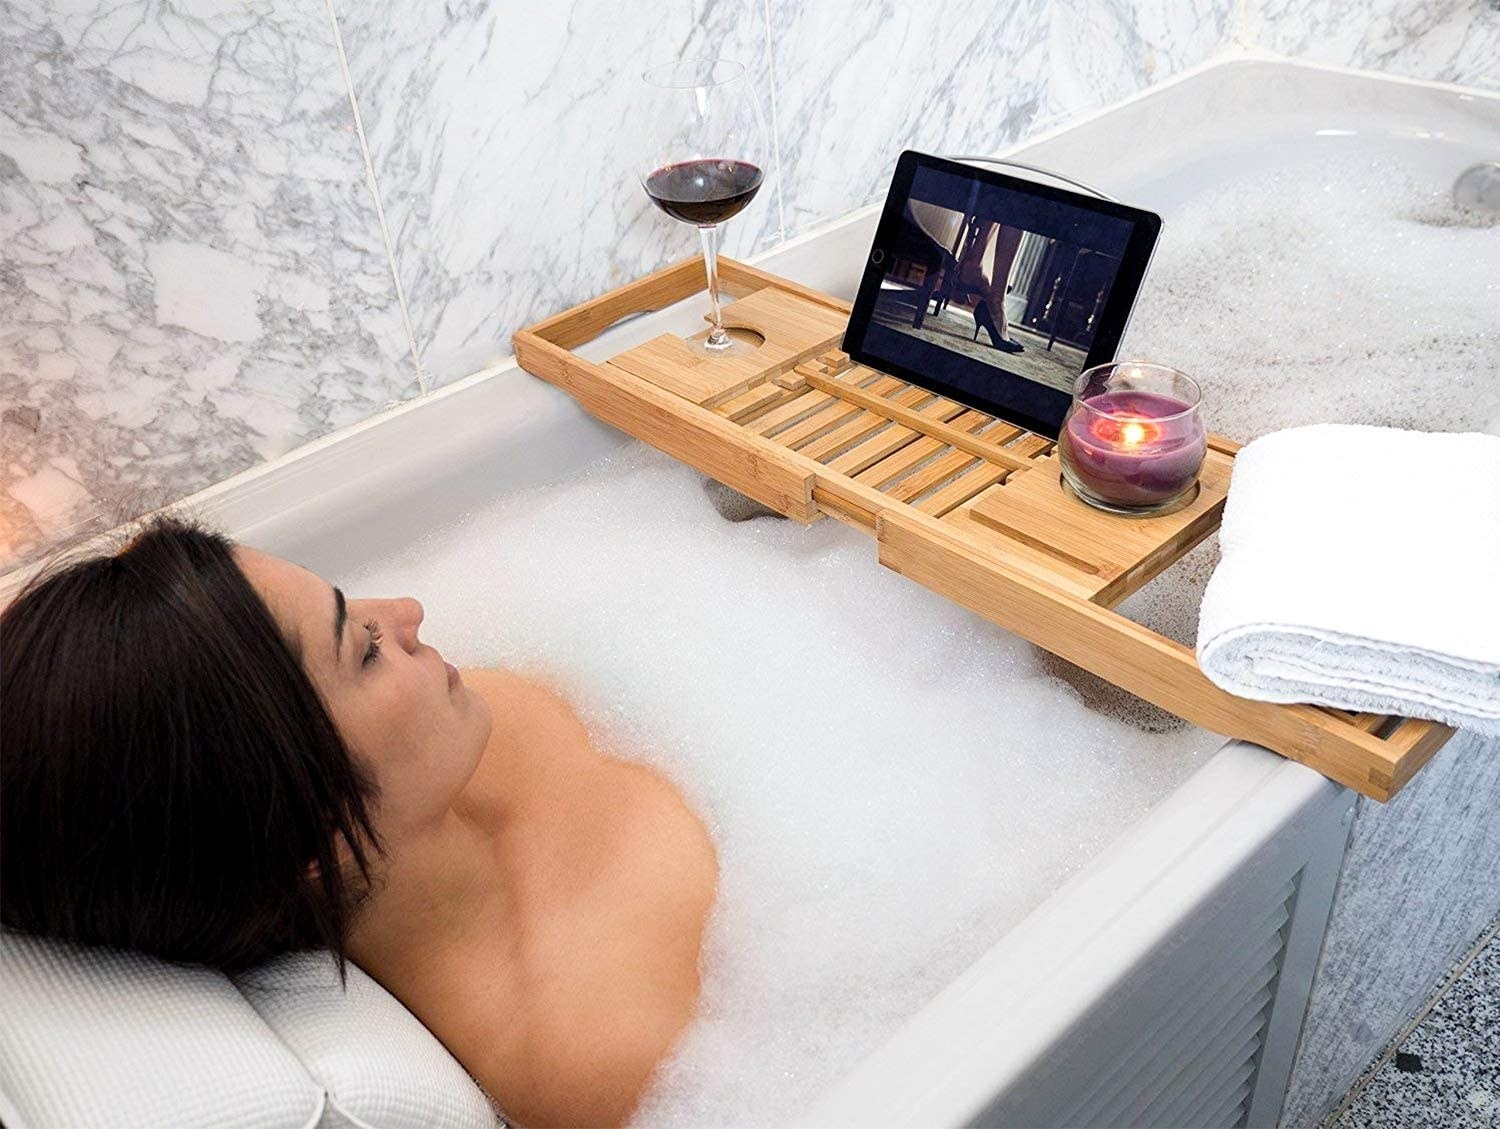 a person lounging in a tub, watching a movie from a tablet that is perched on the tub tray